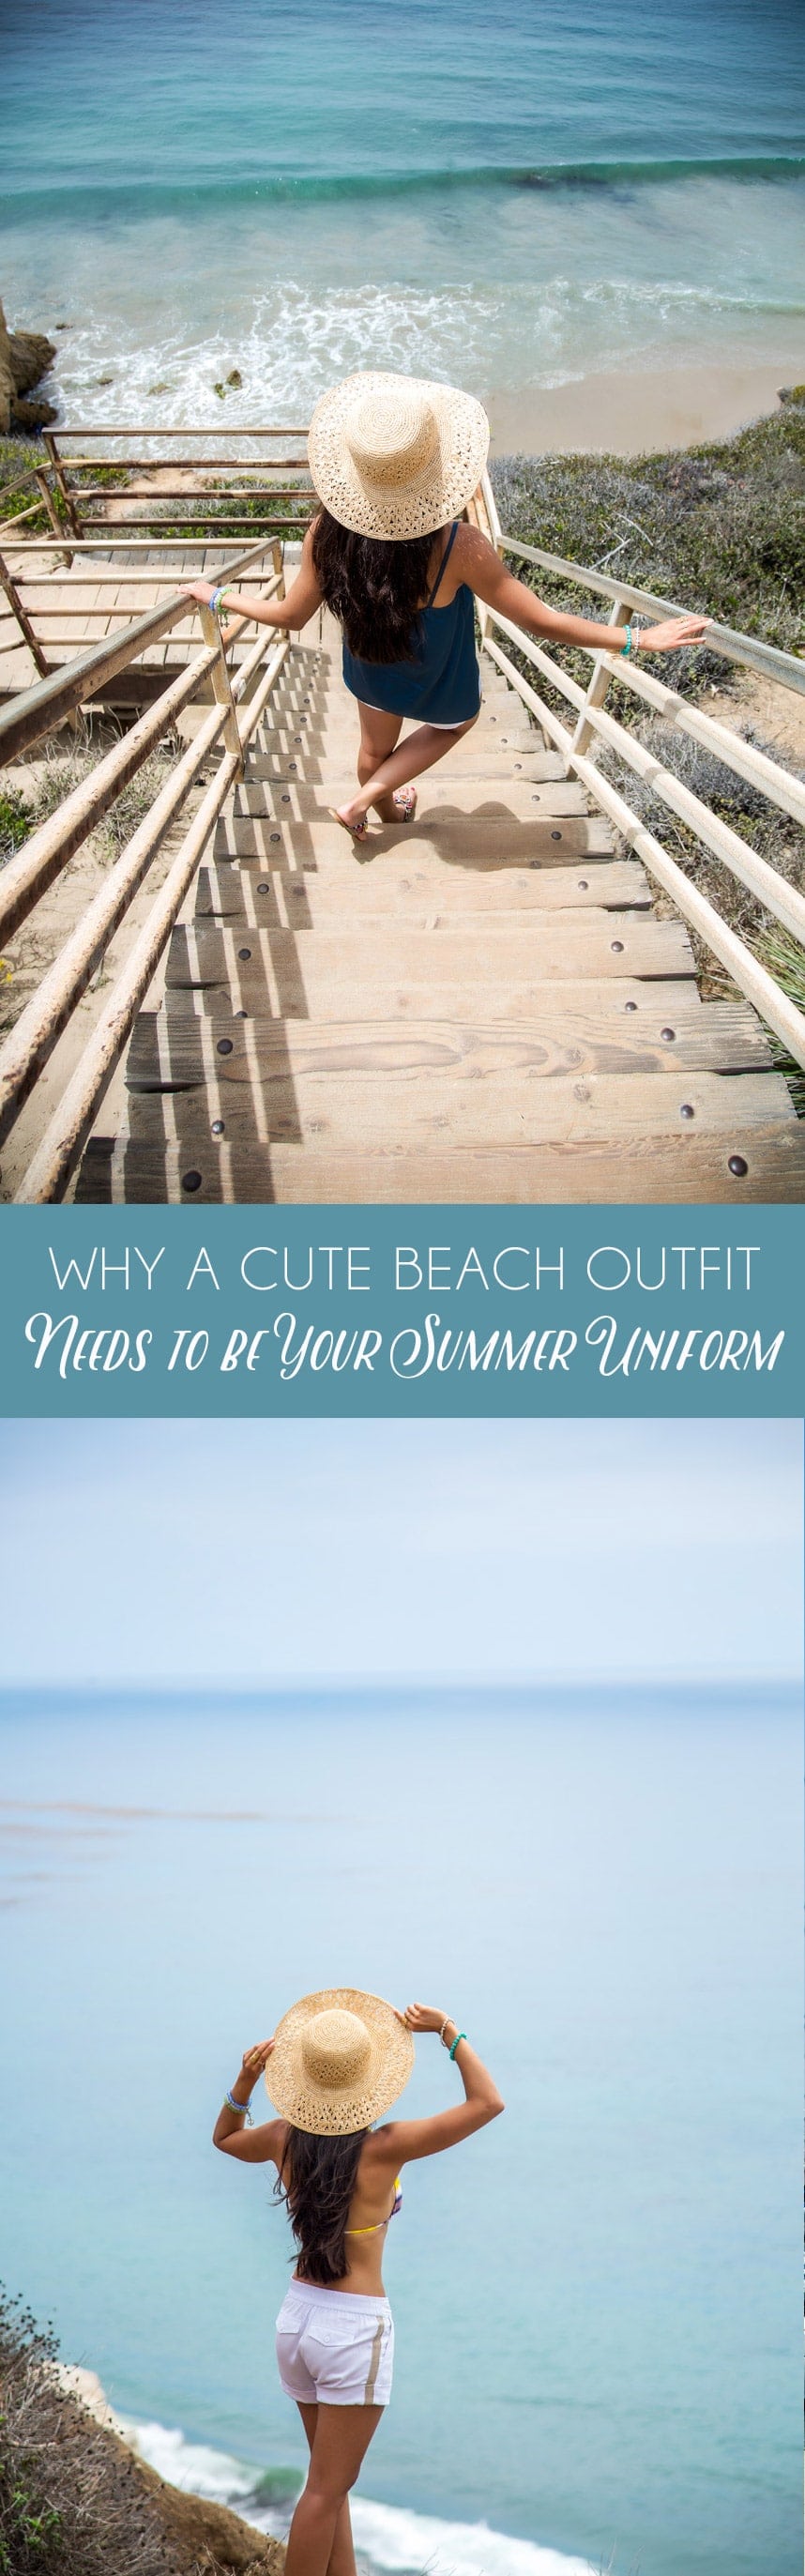 Why a Cute Beach Outfit Needs to be Your Summer Uniform - Visit stylishlyme.com to view more style photos and read style tips on cute beach outfits 